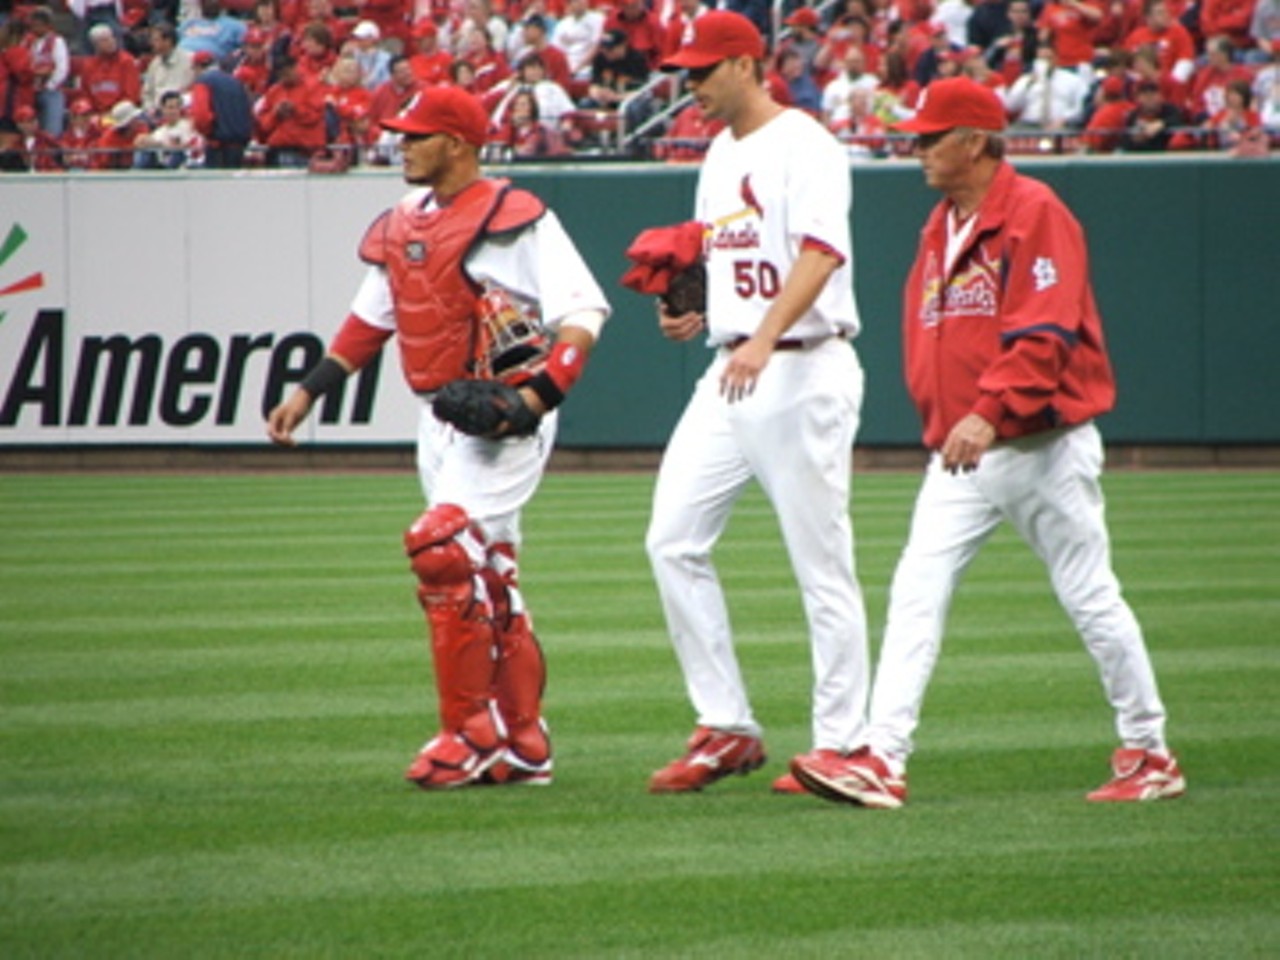 Left to right, Catcher Yadier Molina, starting pitcher Adam Wainwright, pitching coach Dave Duncan. They're taking the stroll from the bullpen to the field to start the game.